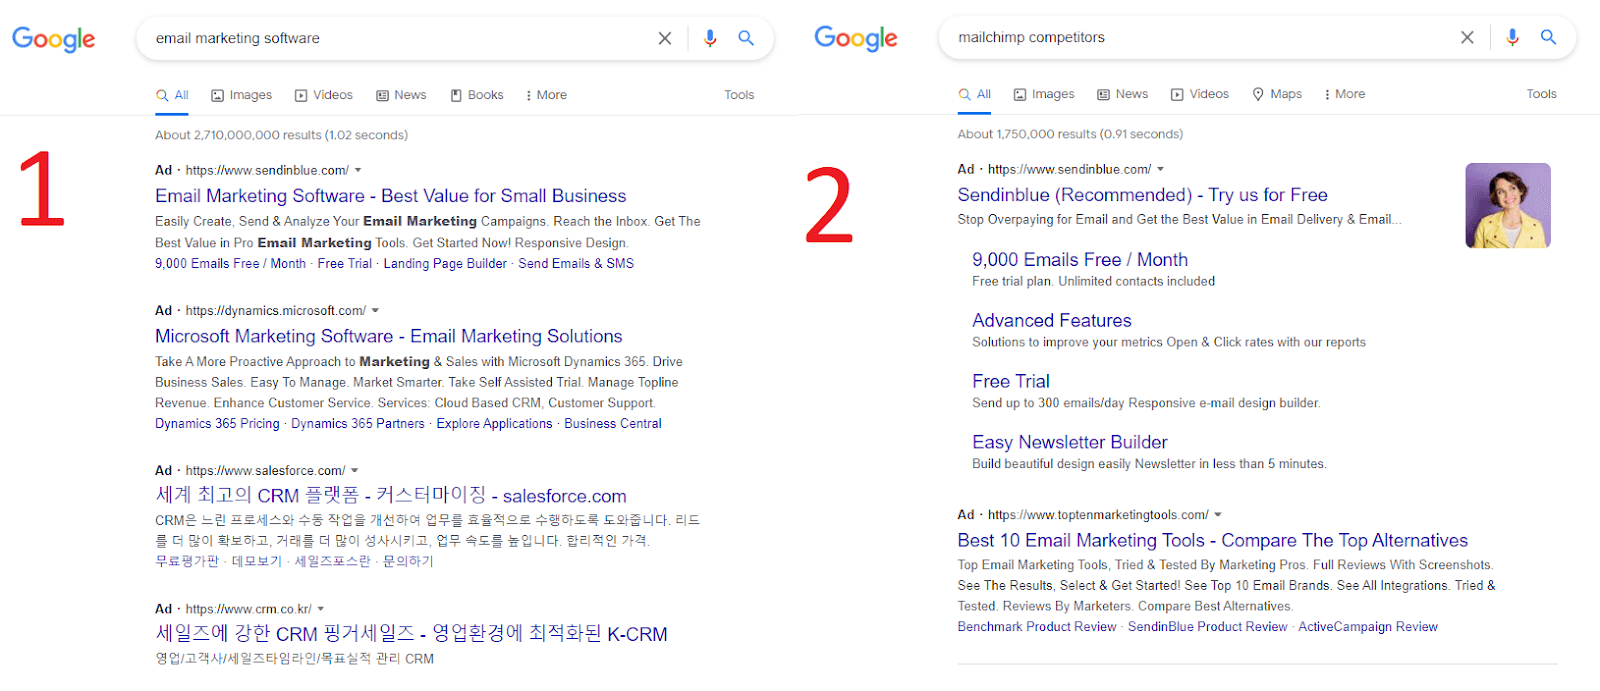 Google search results for email marketing software